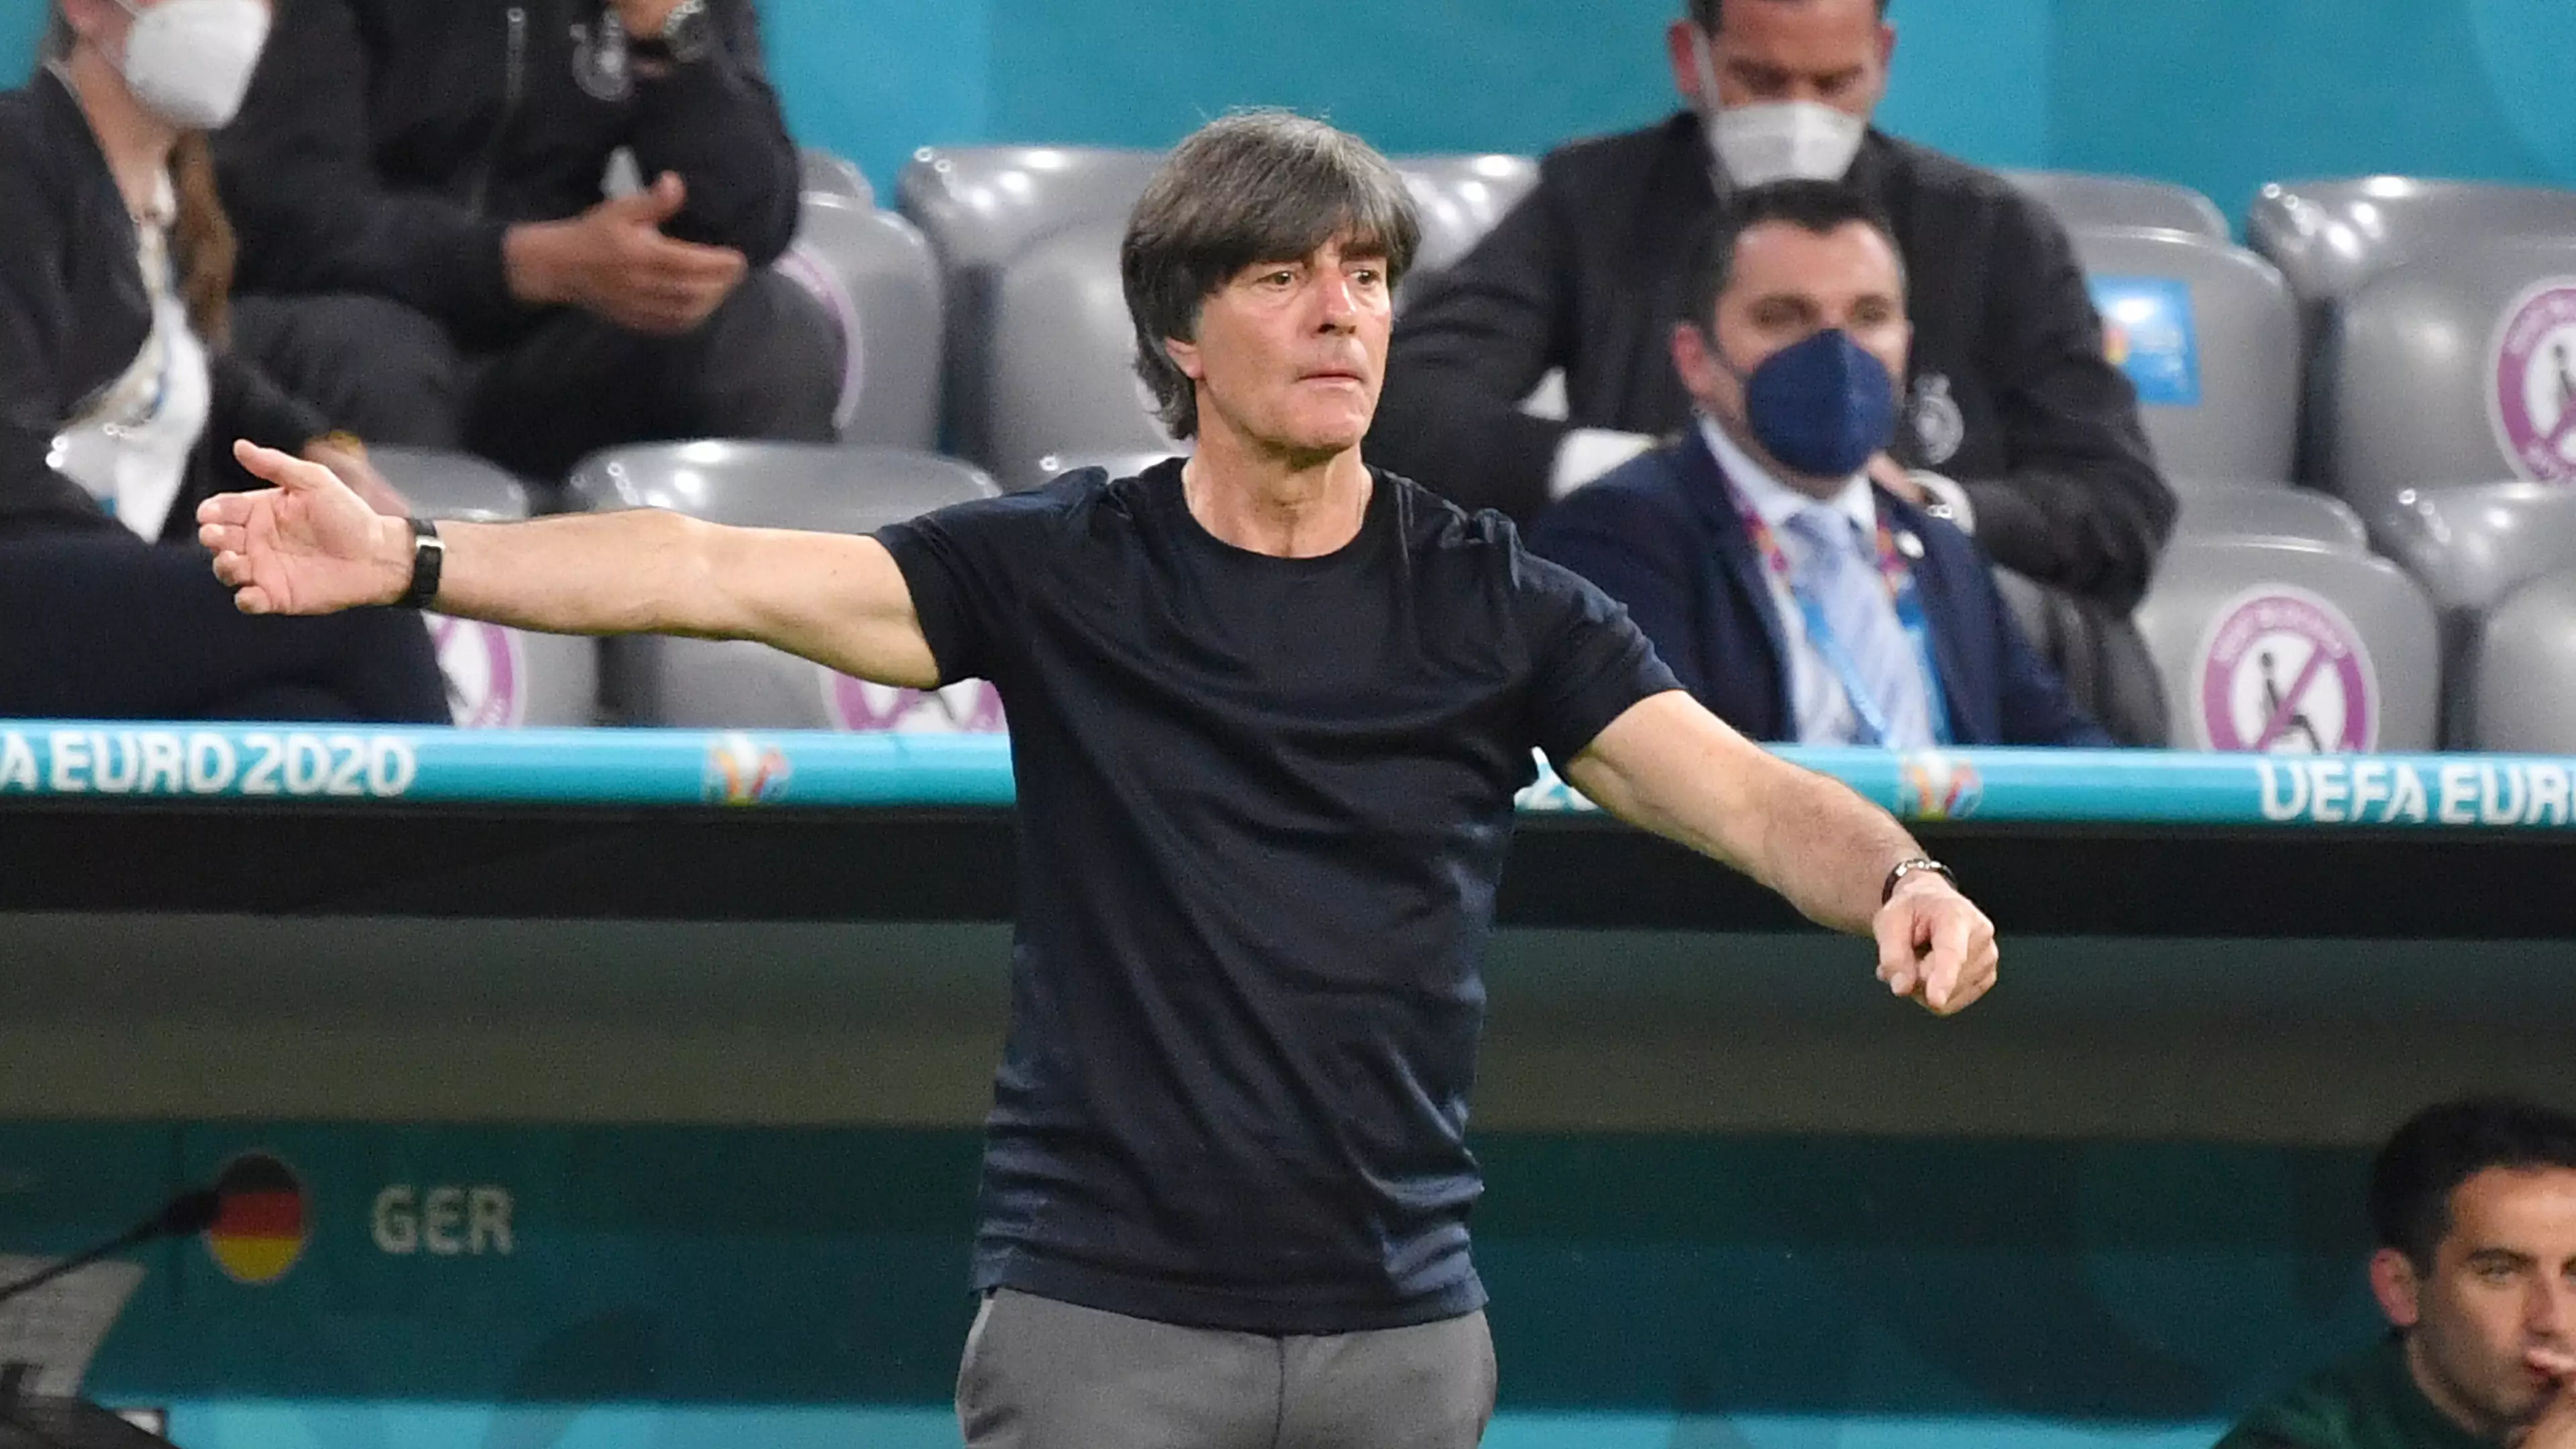 Joachim Löw Gave Questionable Excuse For Scratching And Sniffing 